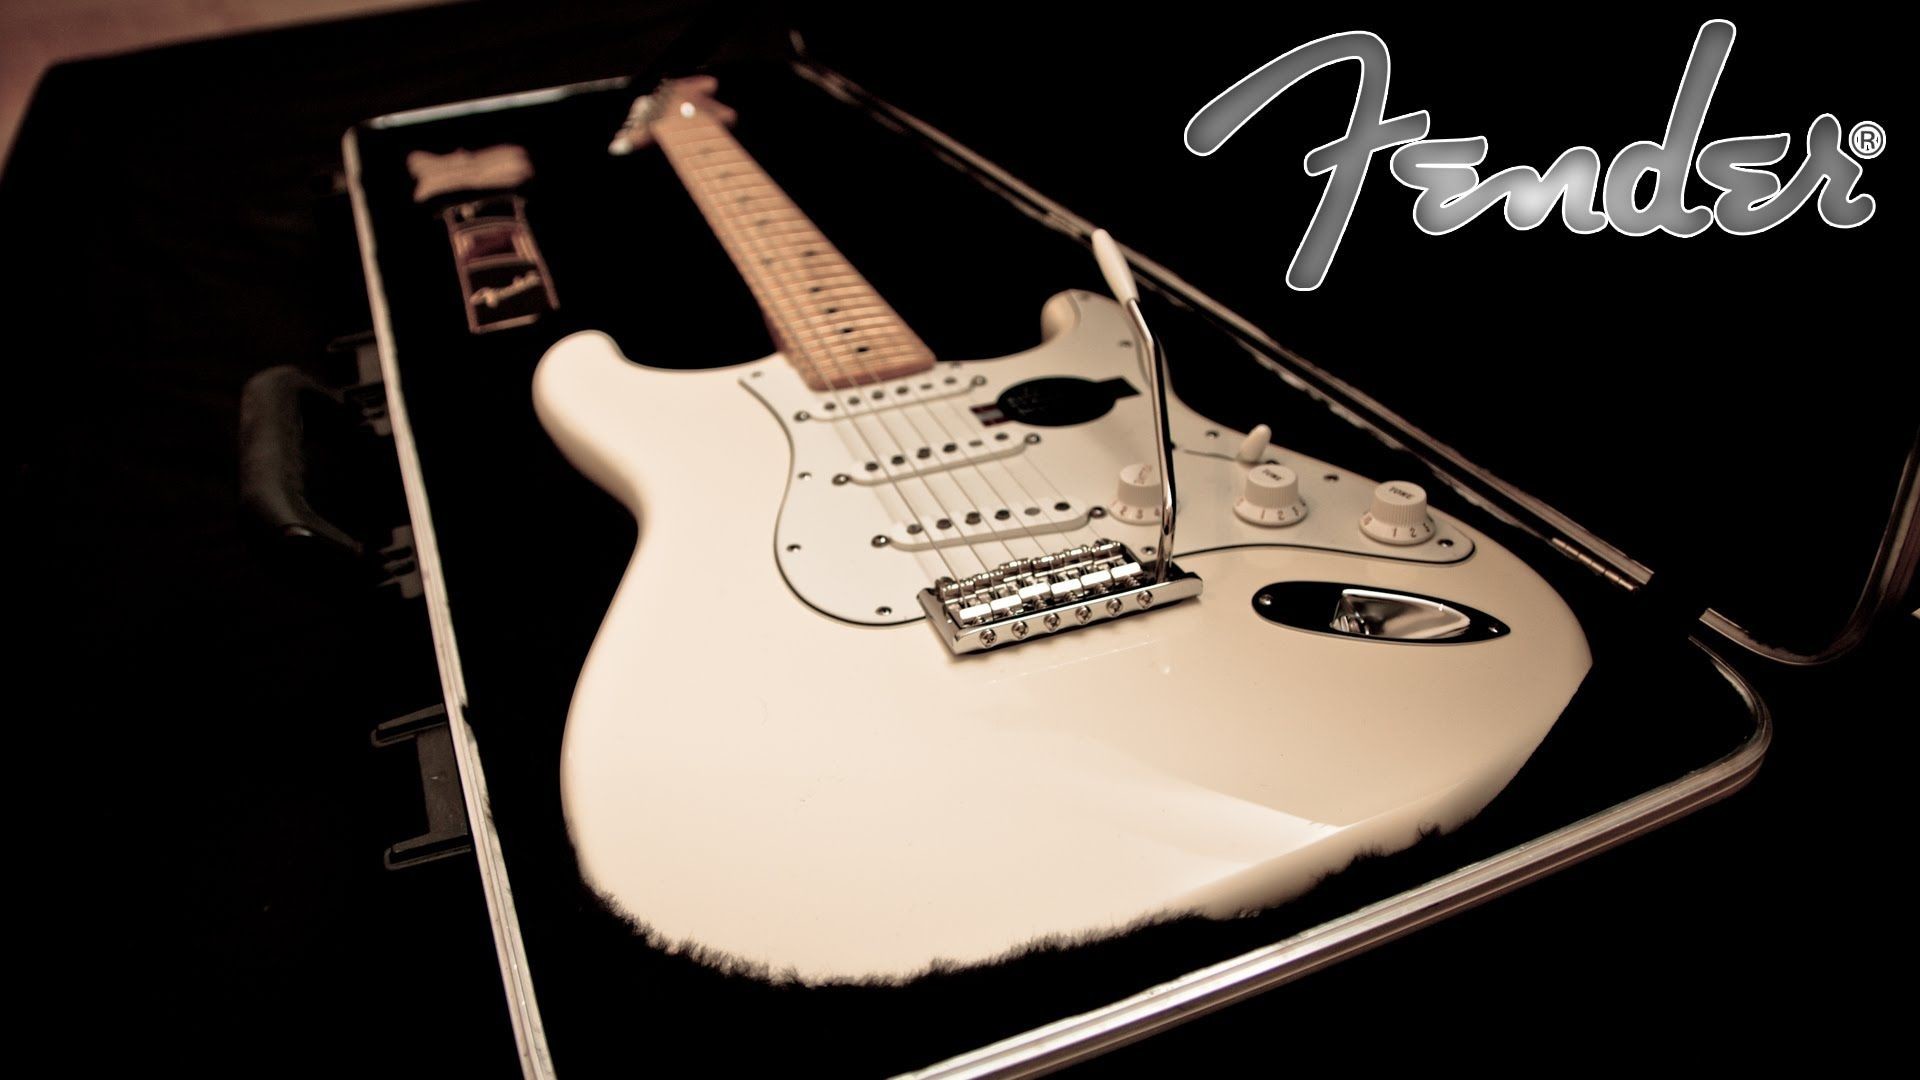 19x1080 Fender American Stratocaster Unboxing 1080p Fender Stratocaster American Special Ow 19x1080 Wallpaper Teahub Io